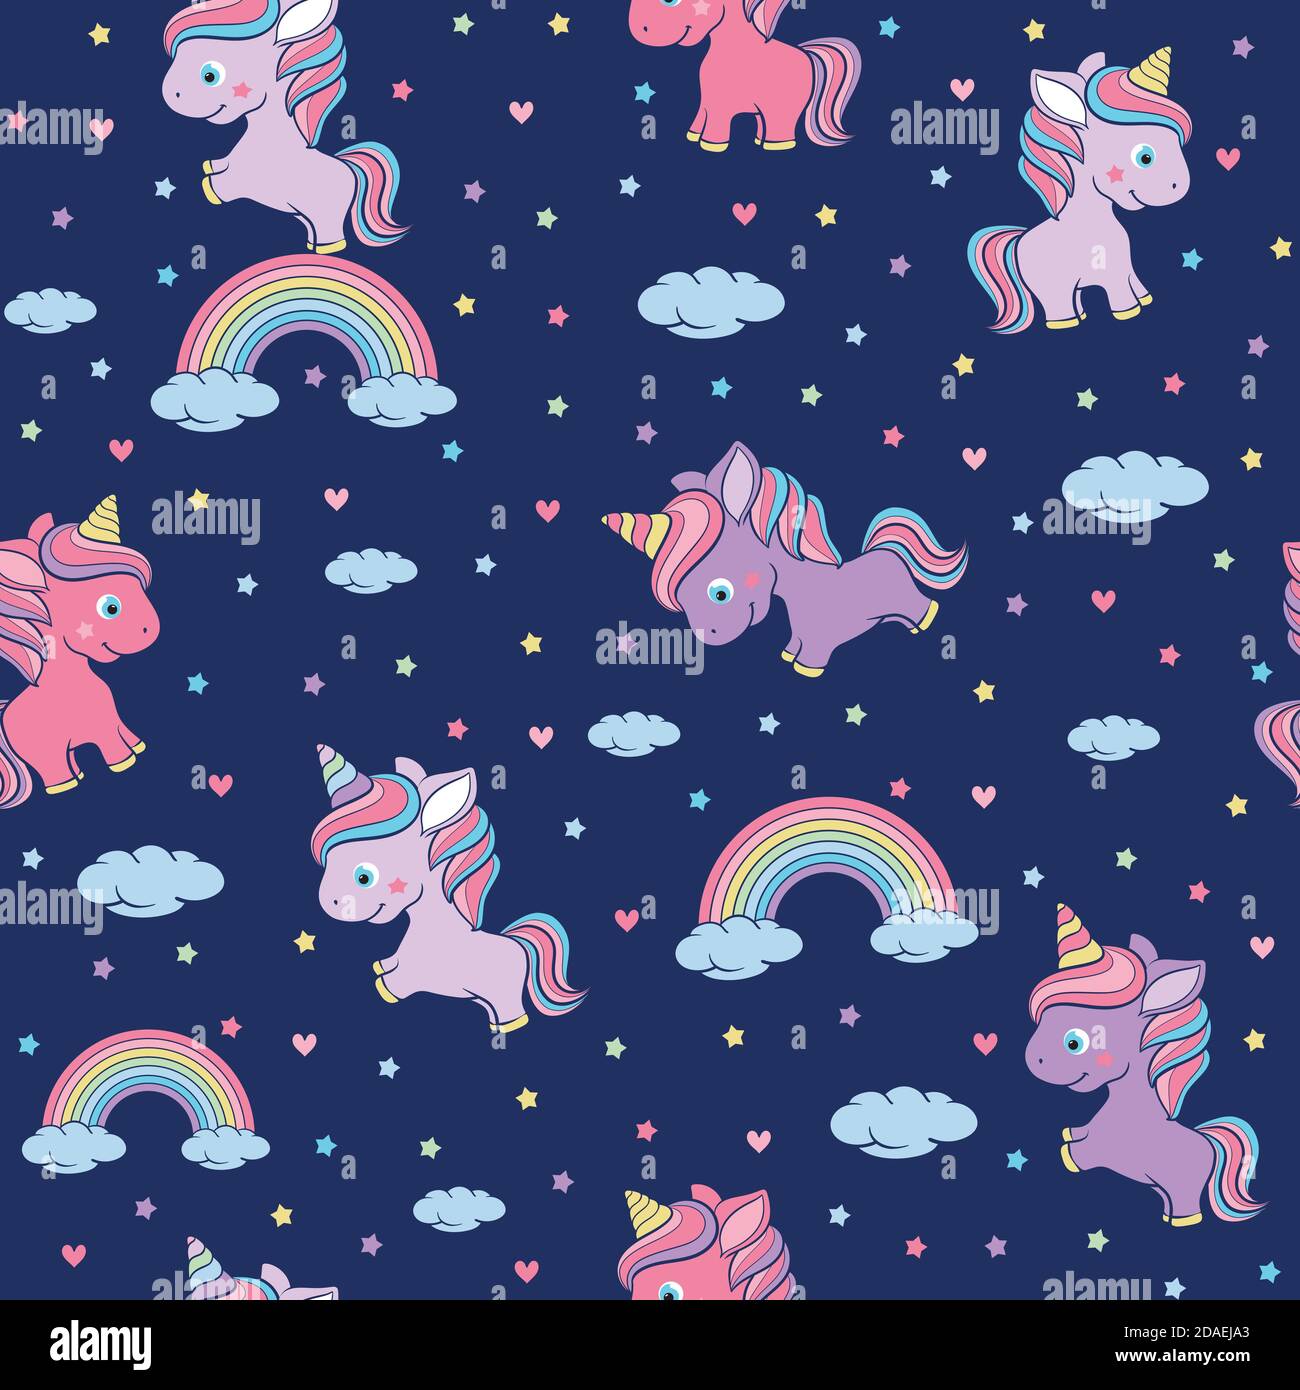 Update 68+ unicorn and rainbow wallpaper latest - in.cdgdbentre